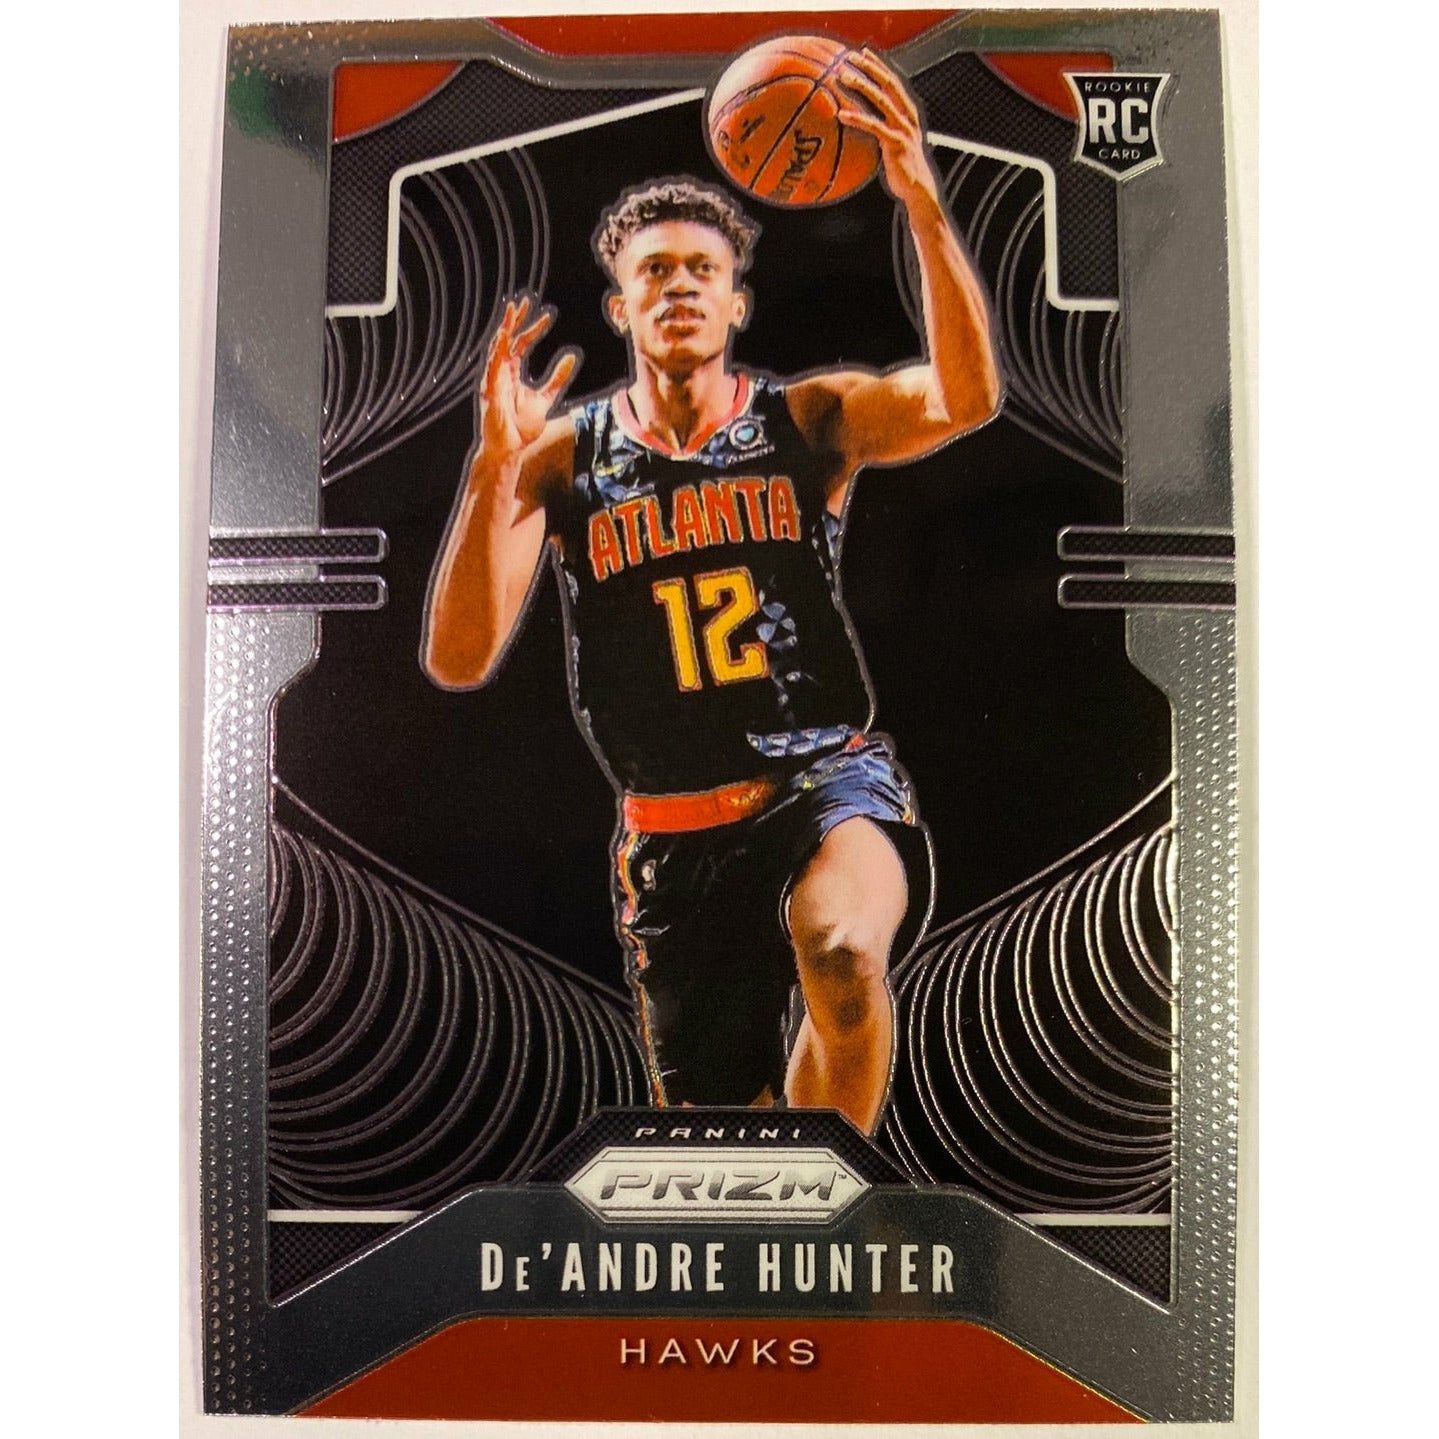  2019-20 Panini Prizm De’Andre Hunter RC  Local Legends Cards & Collectibles